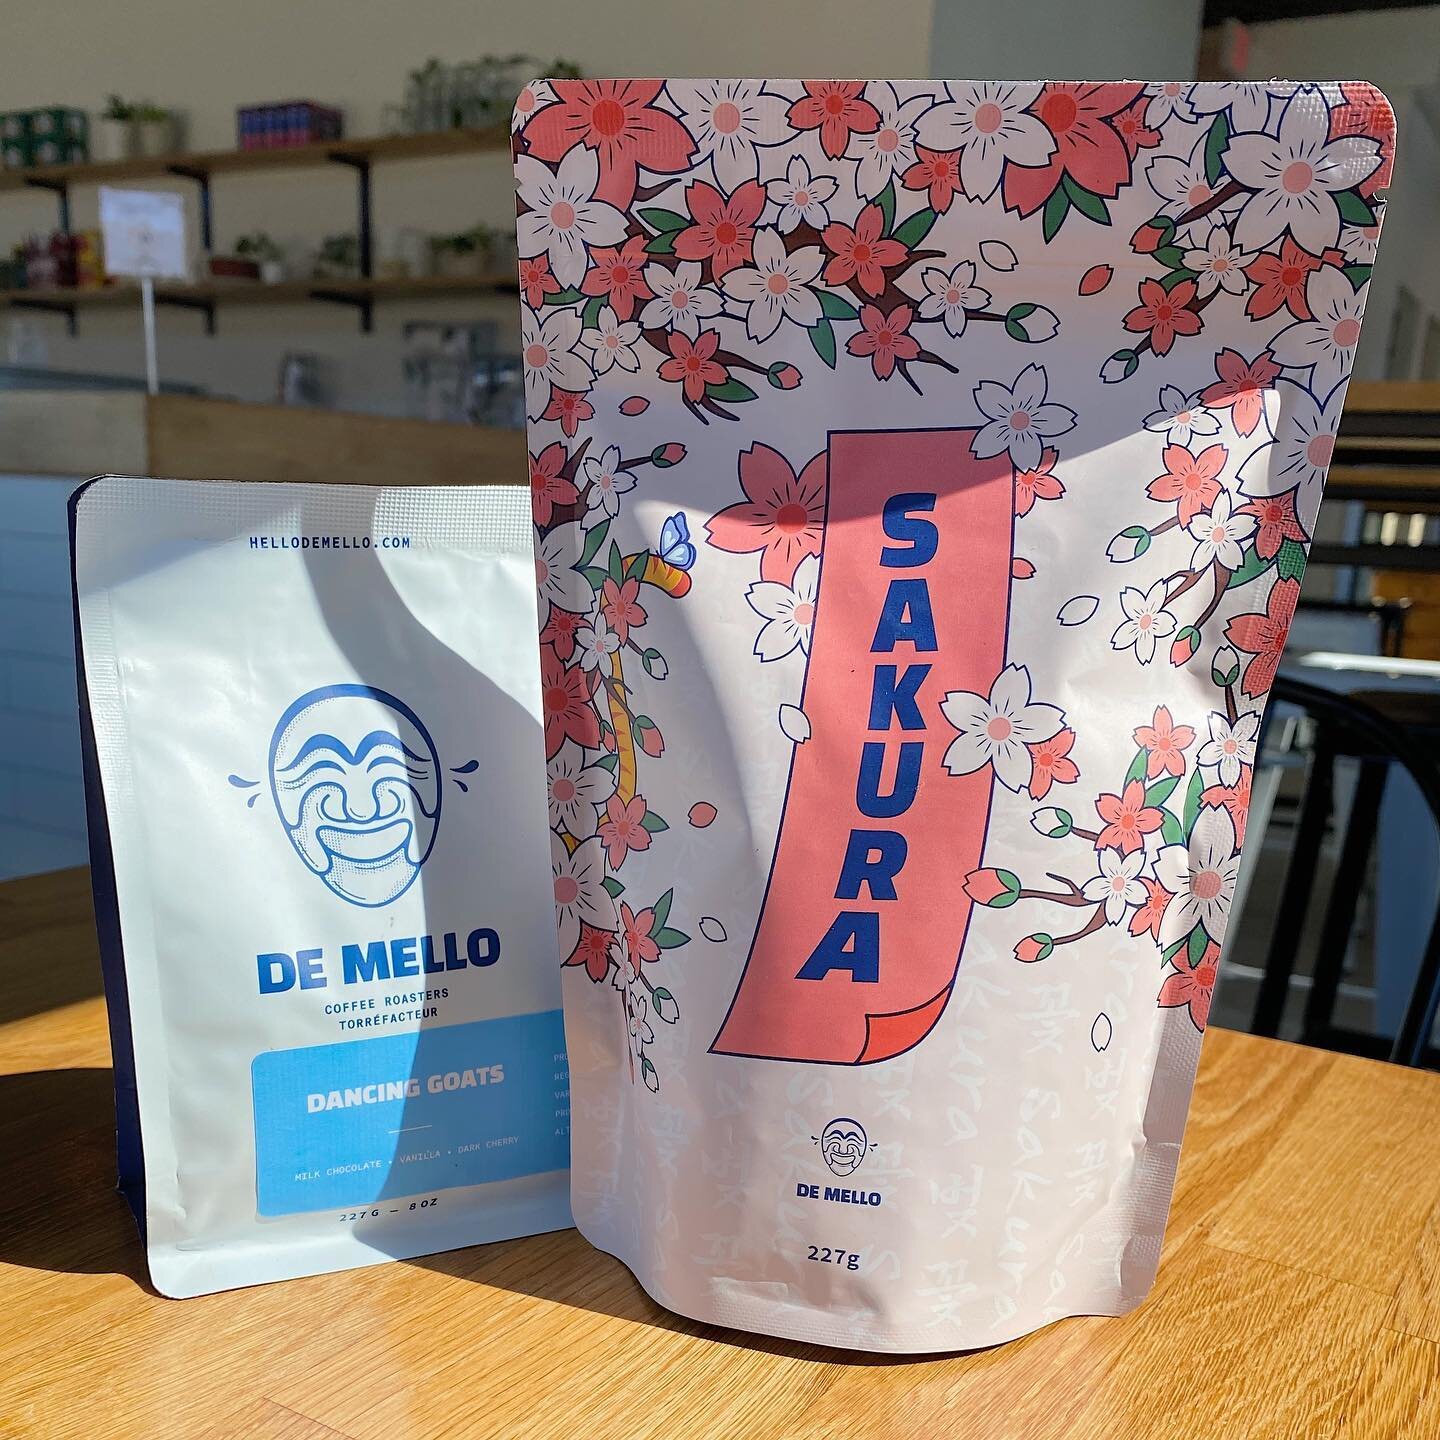 NEW COFFE ROASTER. Come snag a bag from @DeMelloCoffee while we have it! Drinking their coffee may give you superpowers&hellip;